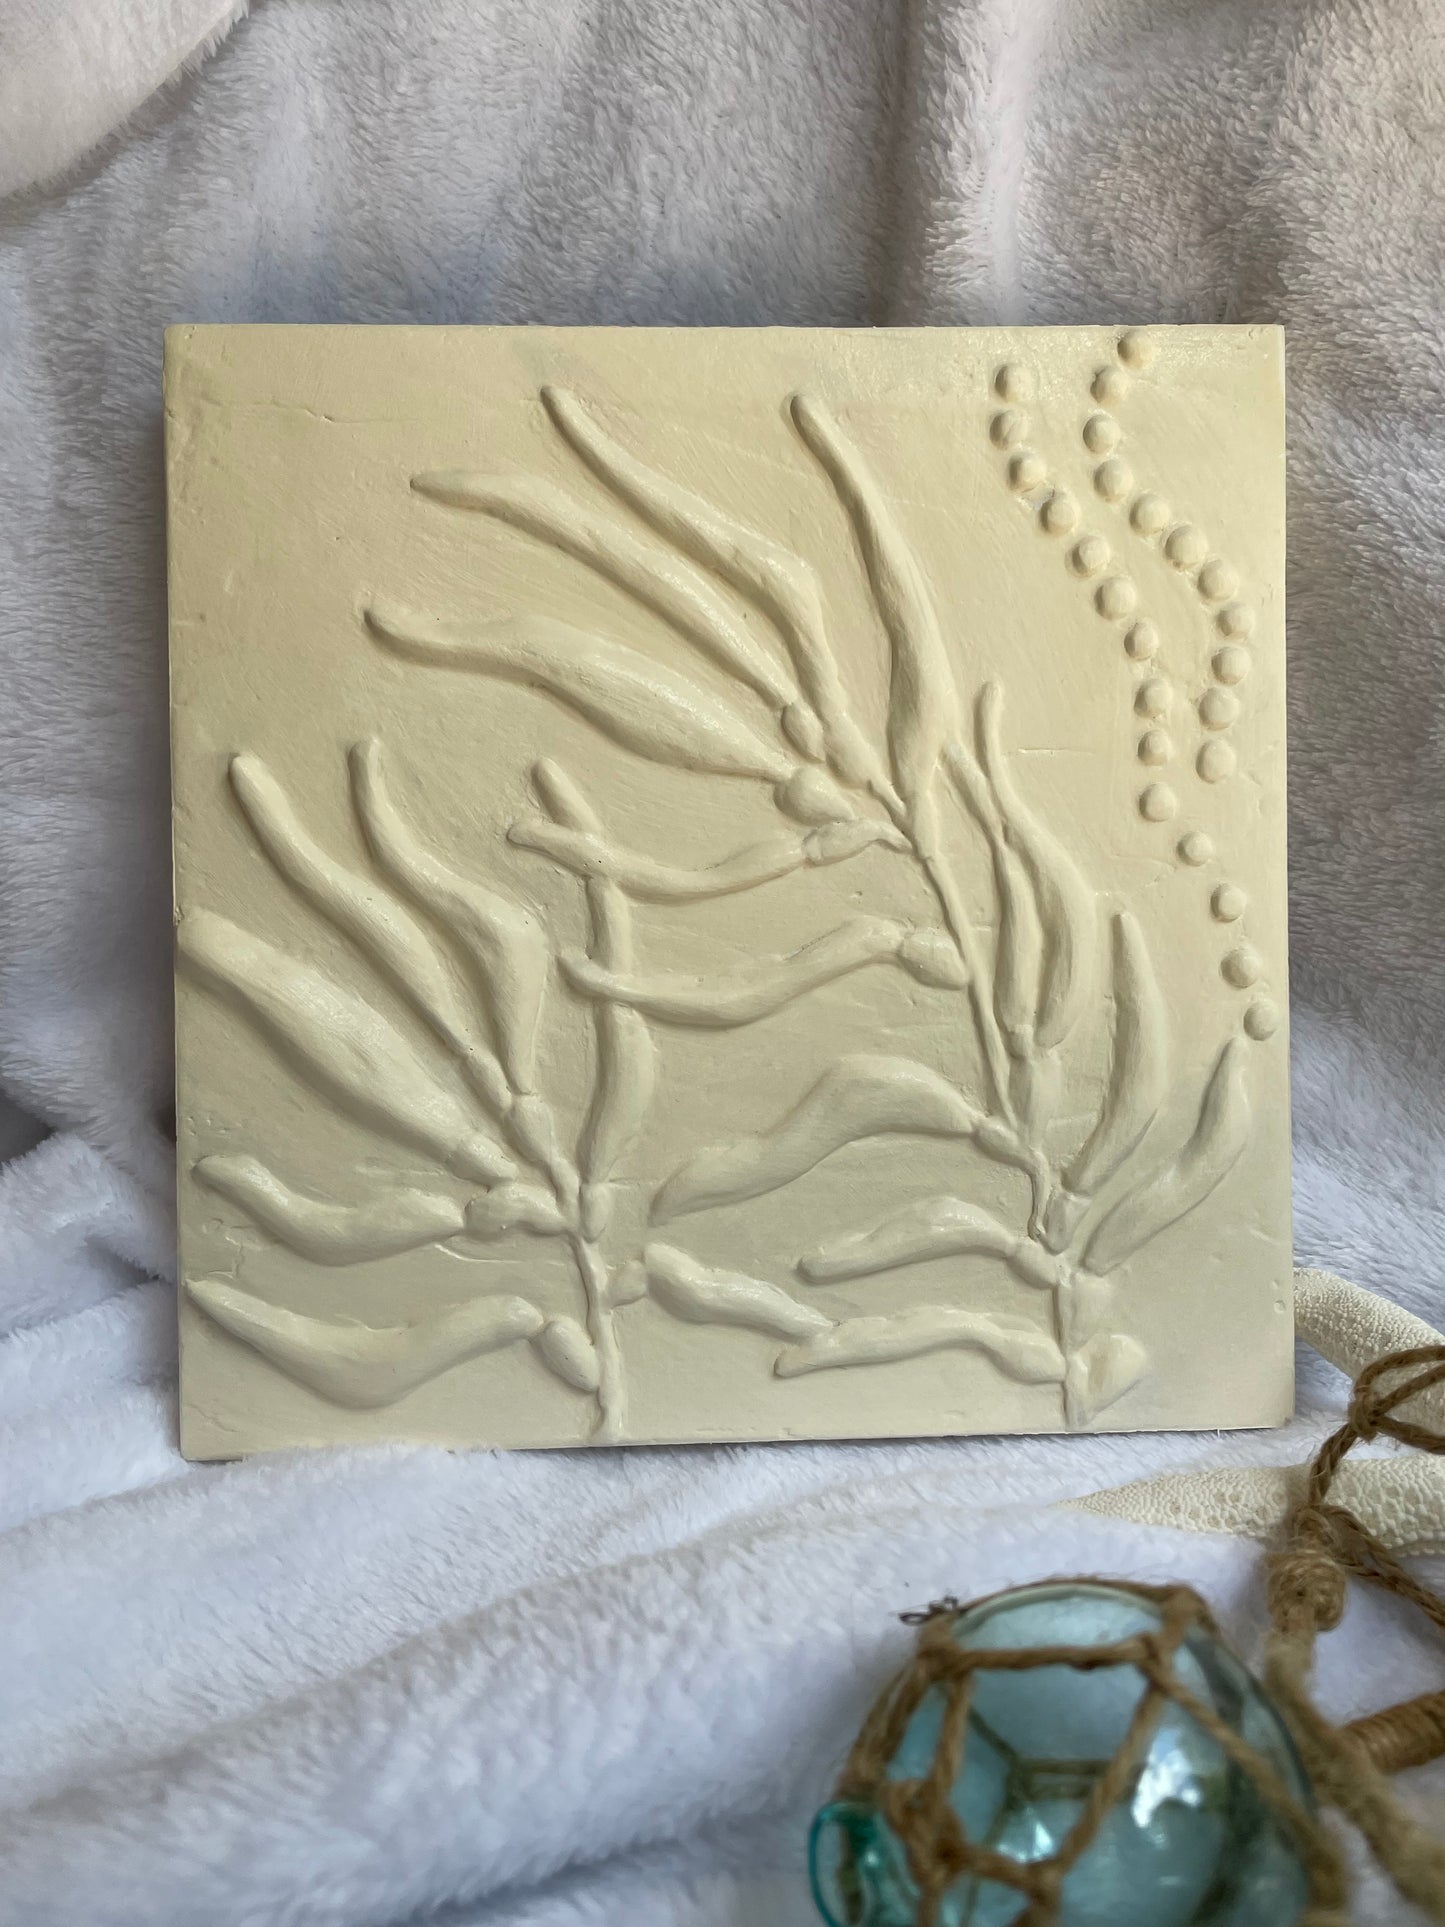 Giant sea kelp forest textured art sculpture, off white wall hanging